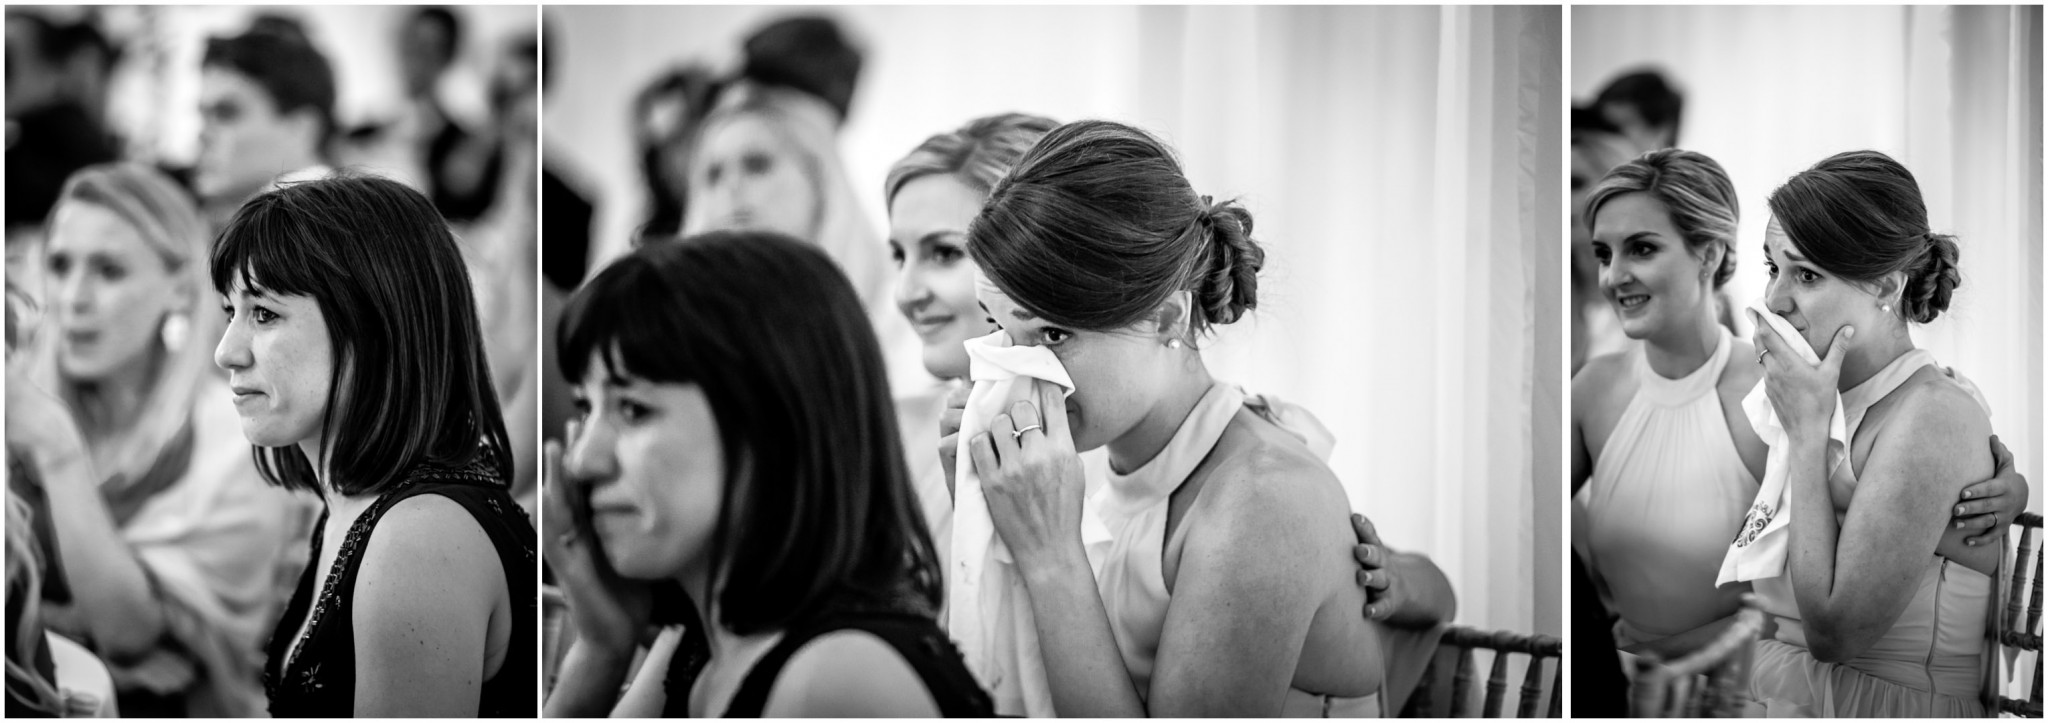 dulwich-picture-gallery-wedding-photography-069